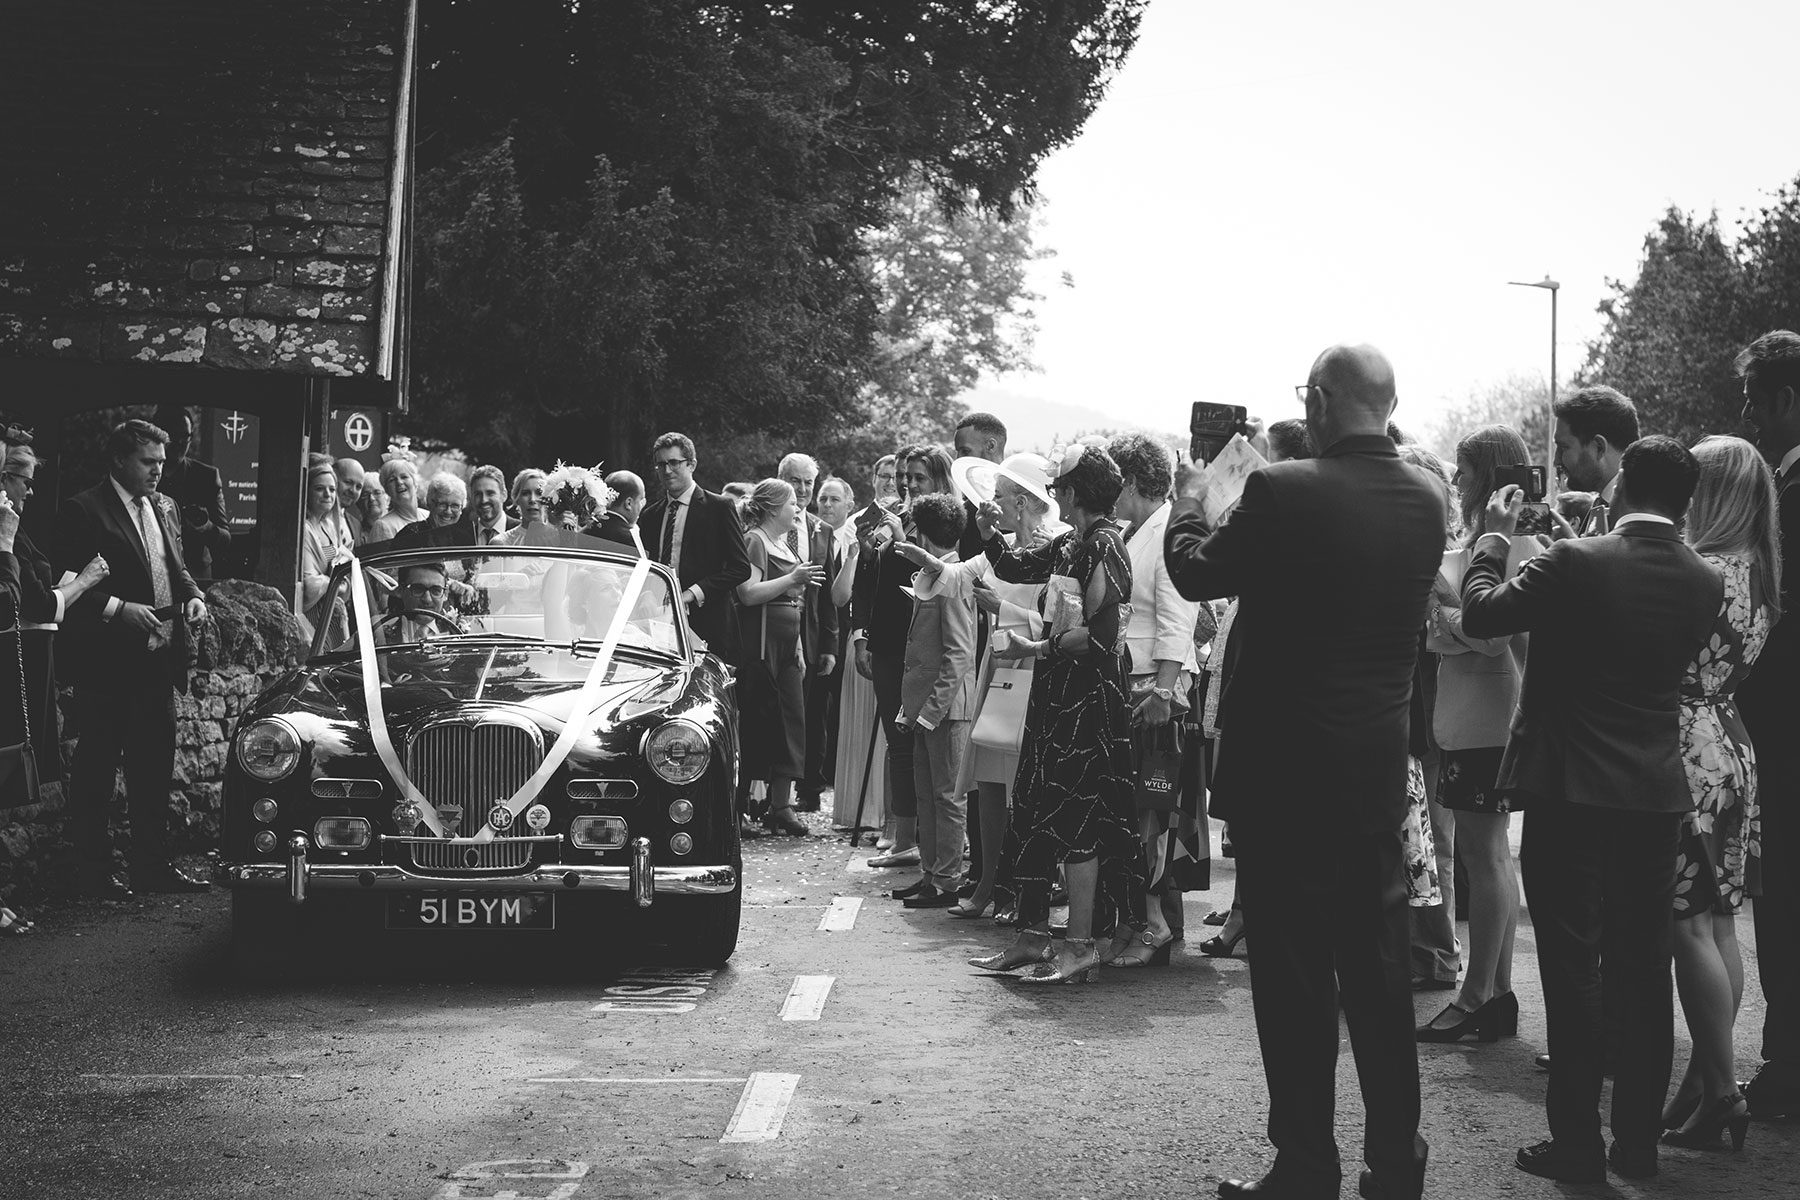 Local wedding day at Crippetts Barn - Reportage Wedding Photography in Cheltenham, Gloucestershire & the Cotswolds | Bullit Photography.